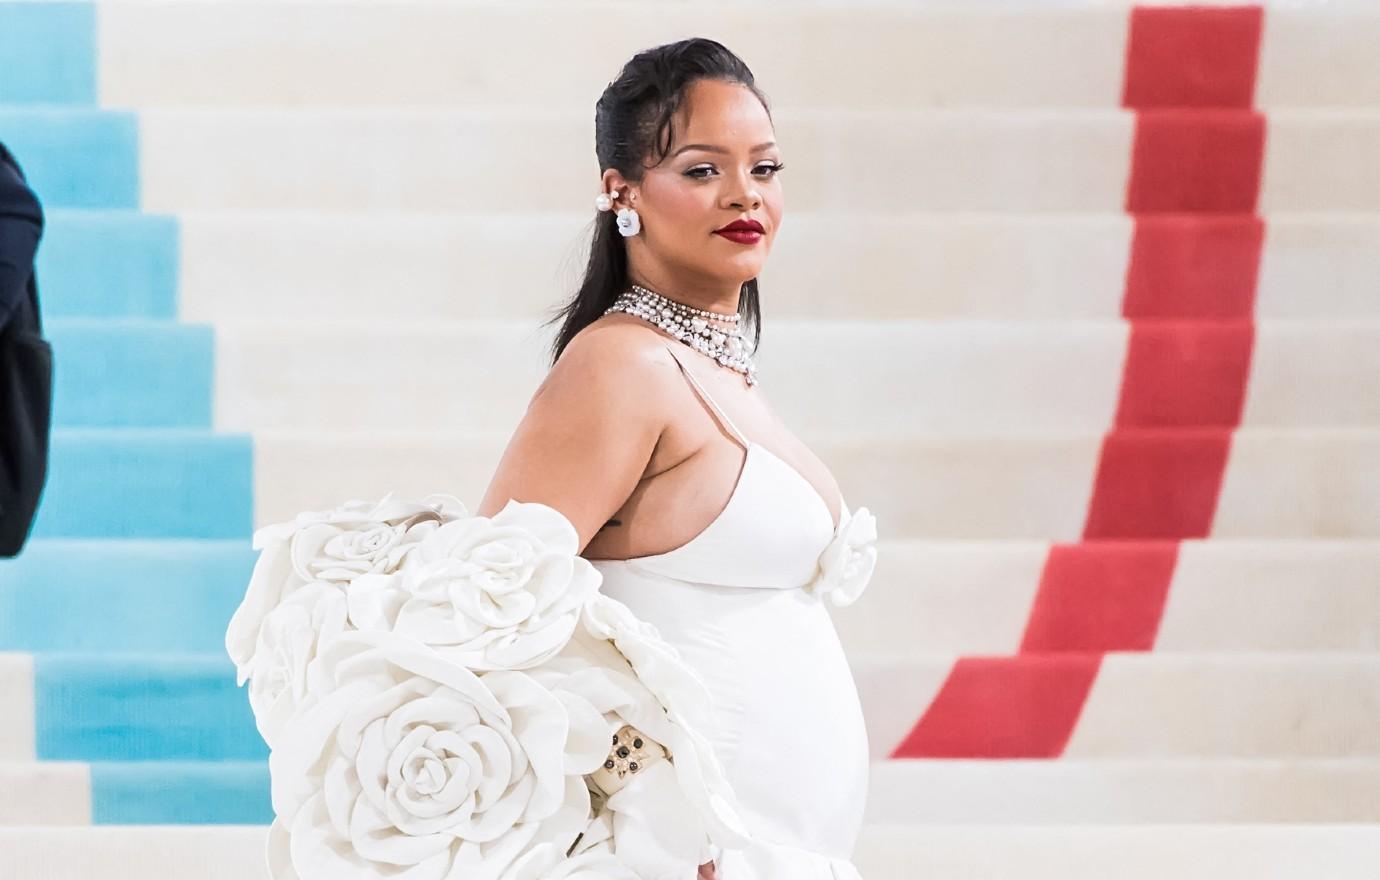 James Hall on X: Rihanna's new luxury fashion house Fenty (singer's full  name is Robyn Rihanna Fenty) is setting the fashion world afire today. Her  new brand's clothing line will include African-inspired